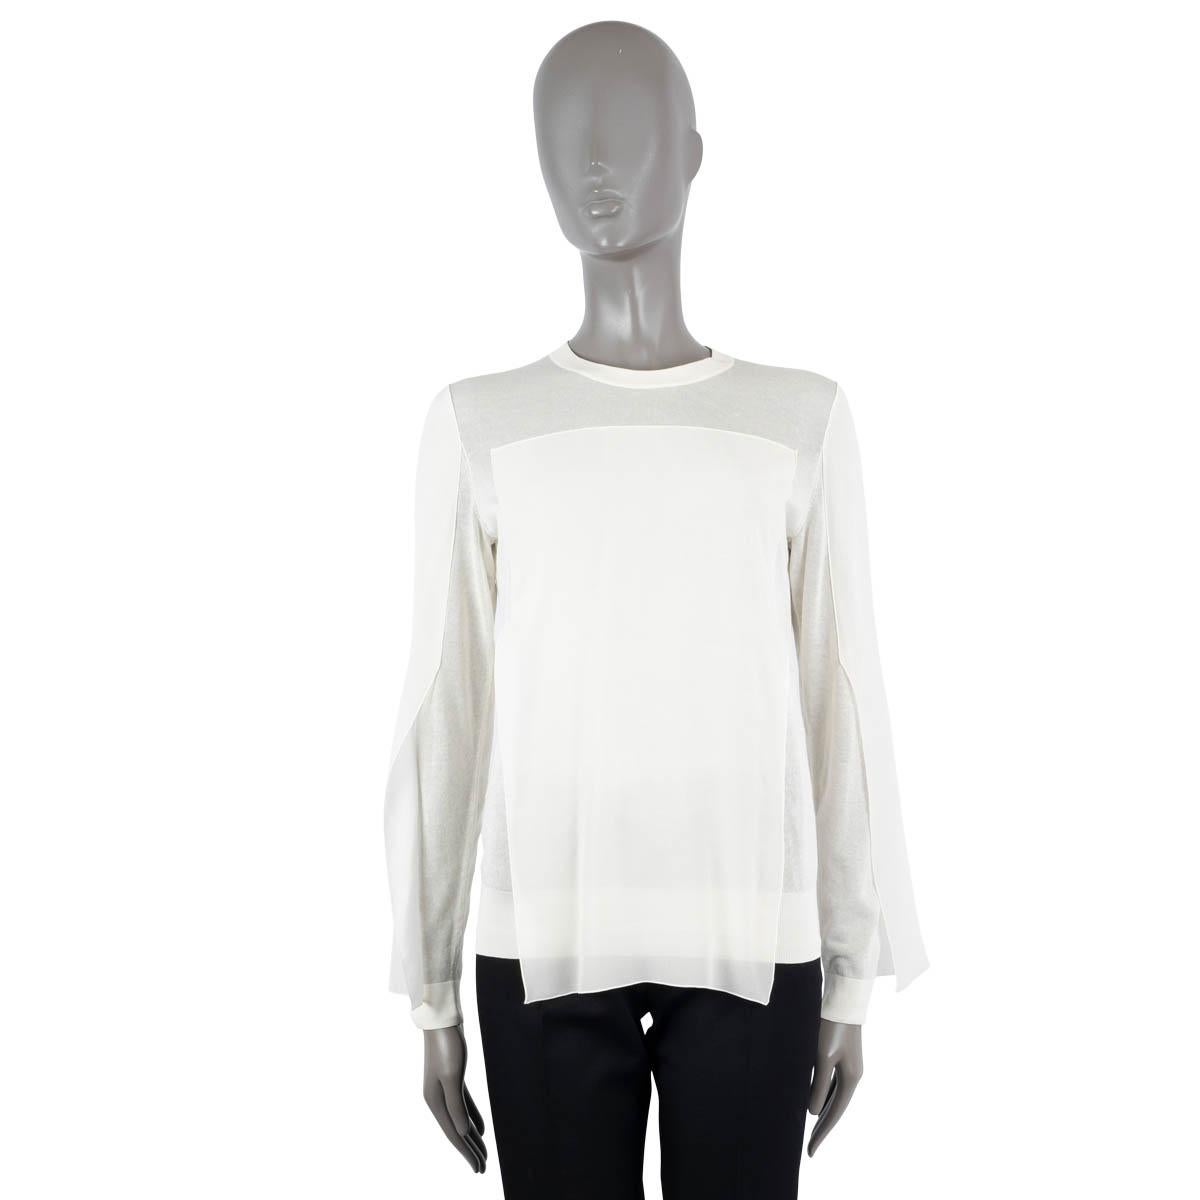 100% authentic Akris crewneck sweater in ivory cotton knit (100%) with semi sheer silk panels on top. Brand new with tags.

Measurements
Tag Size	34
Size	XS
Shoulder Width	40cm (15.6in)
Bust From	92cm (35.9in)
Waist From	94cm (36.7in)
Hips From	78cm